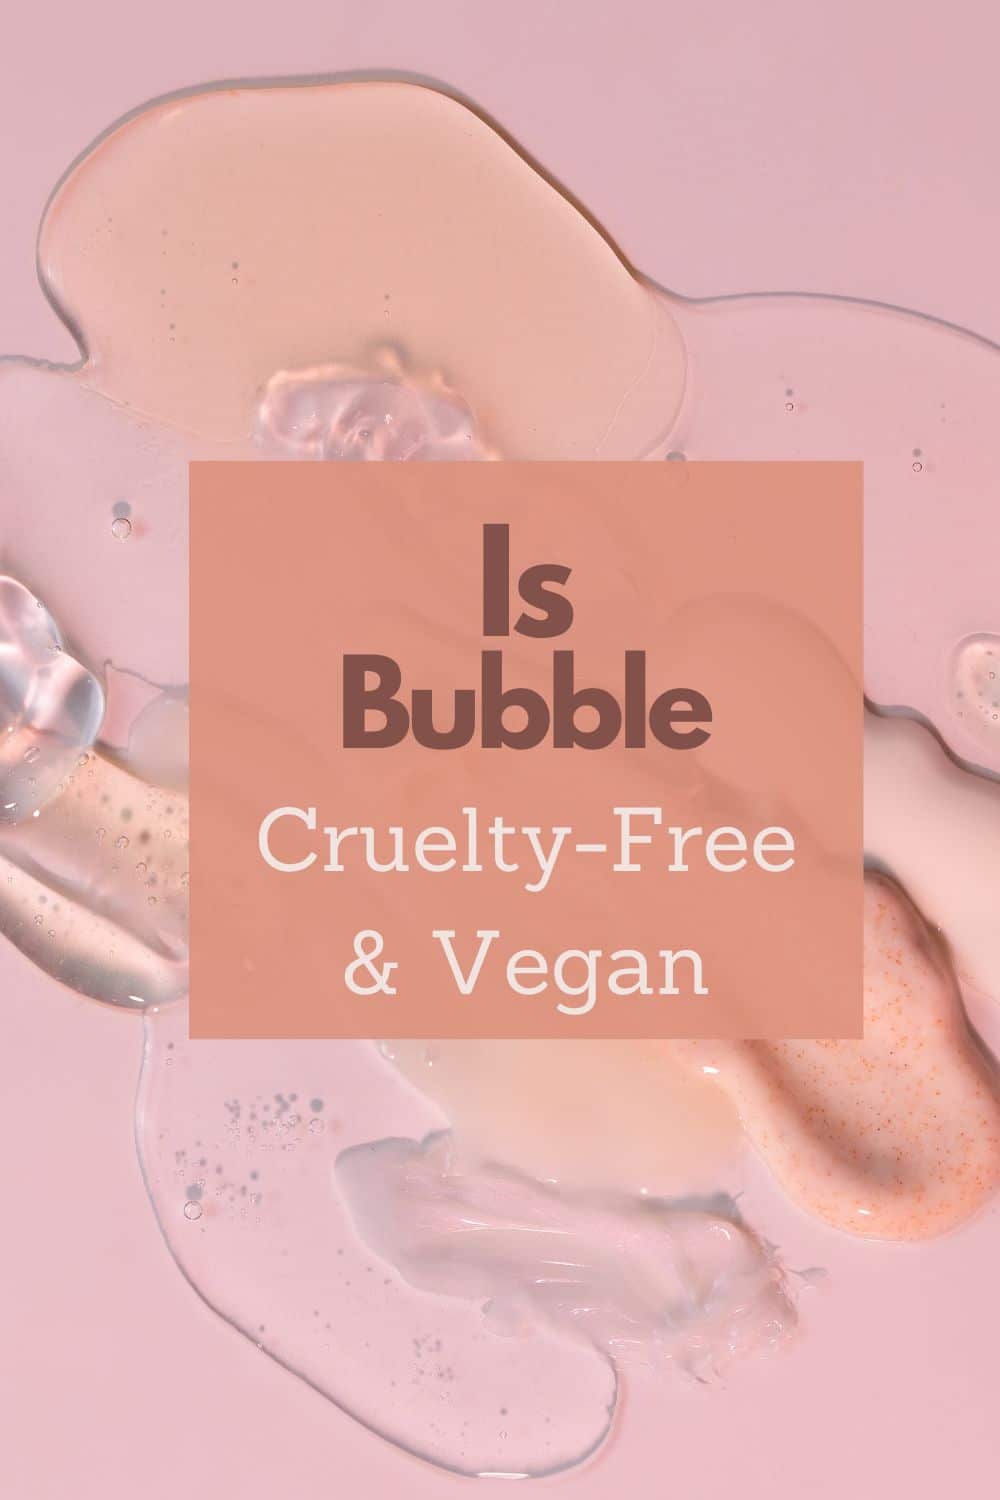 Is Bubble Skincare Vegan and Cruelty-Free?